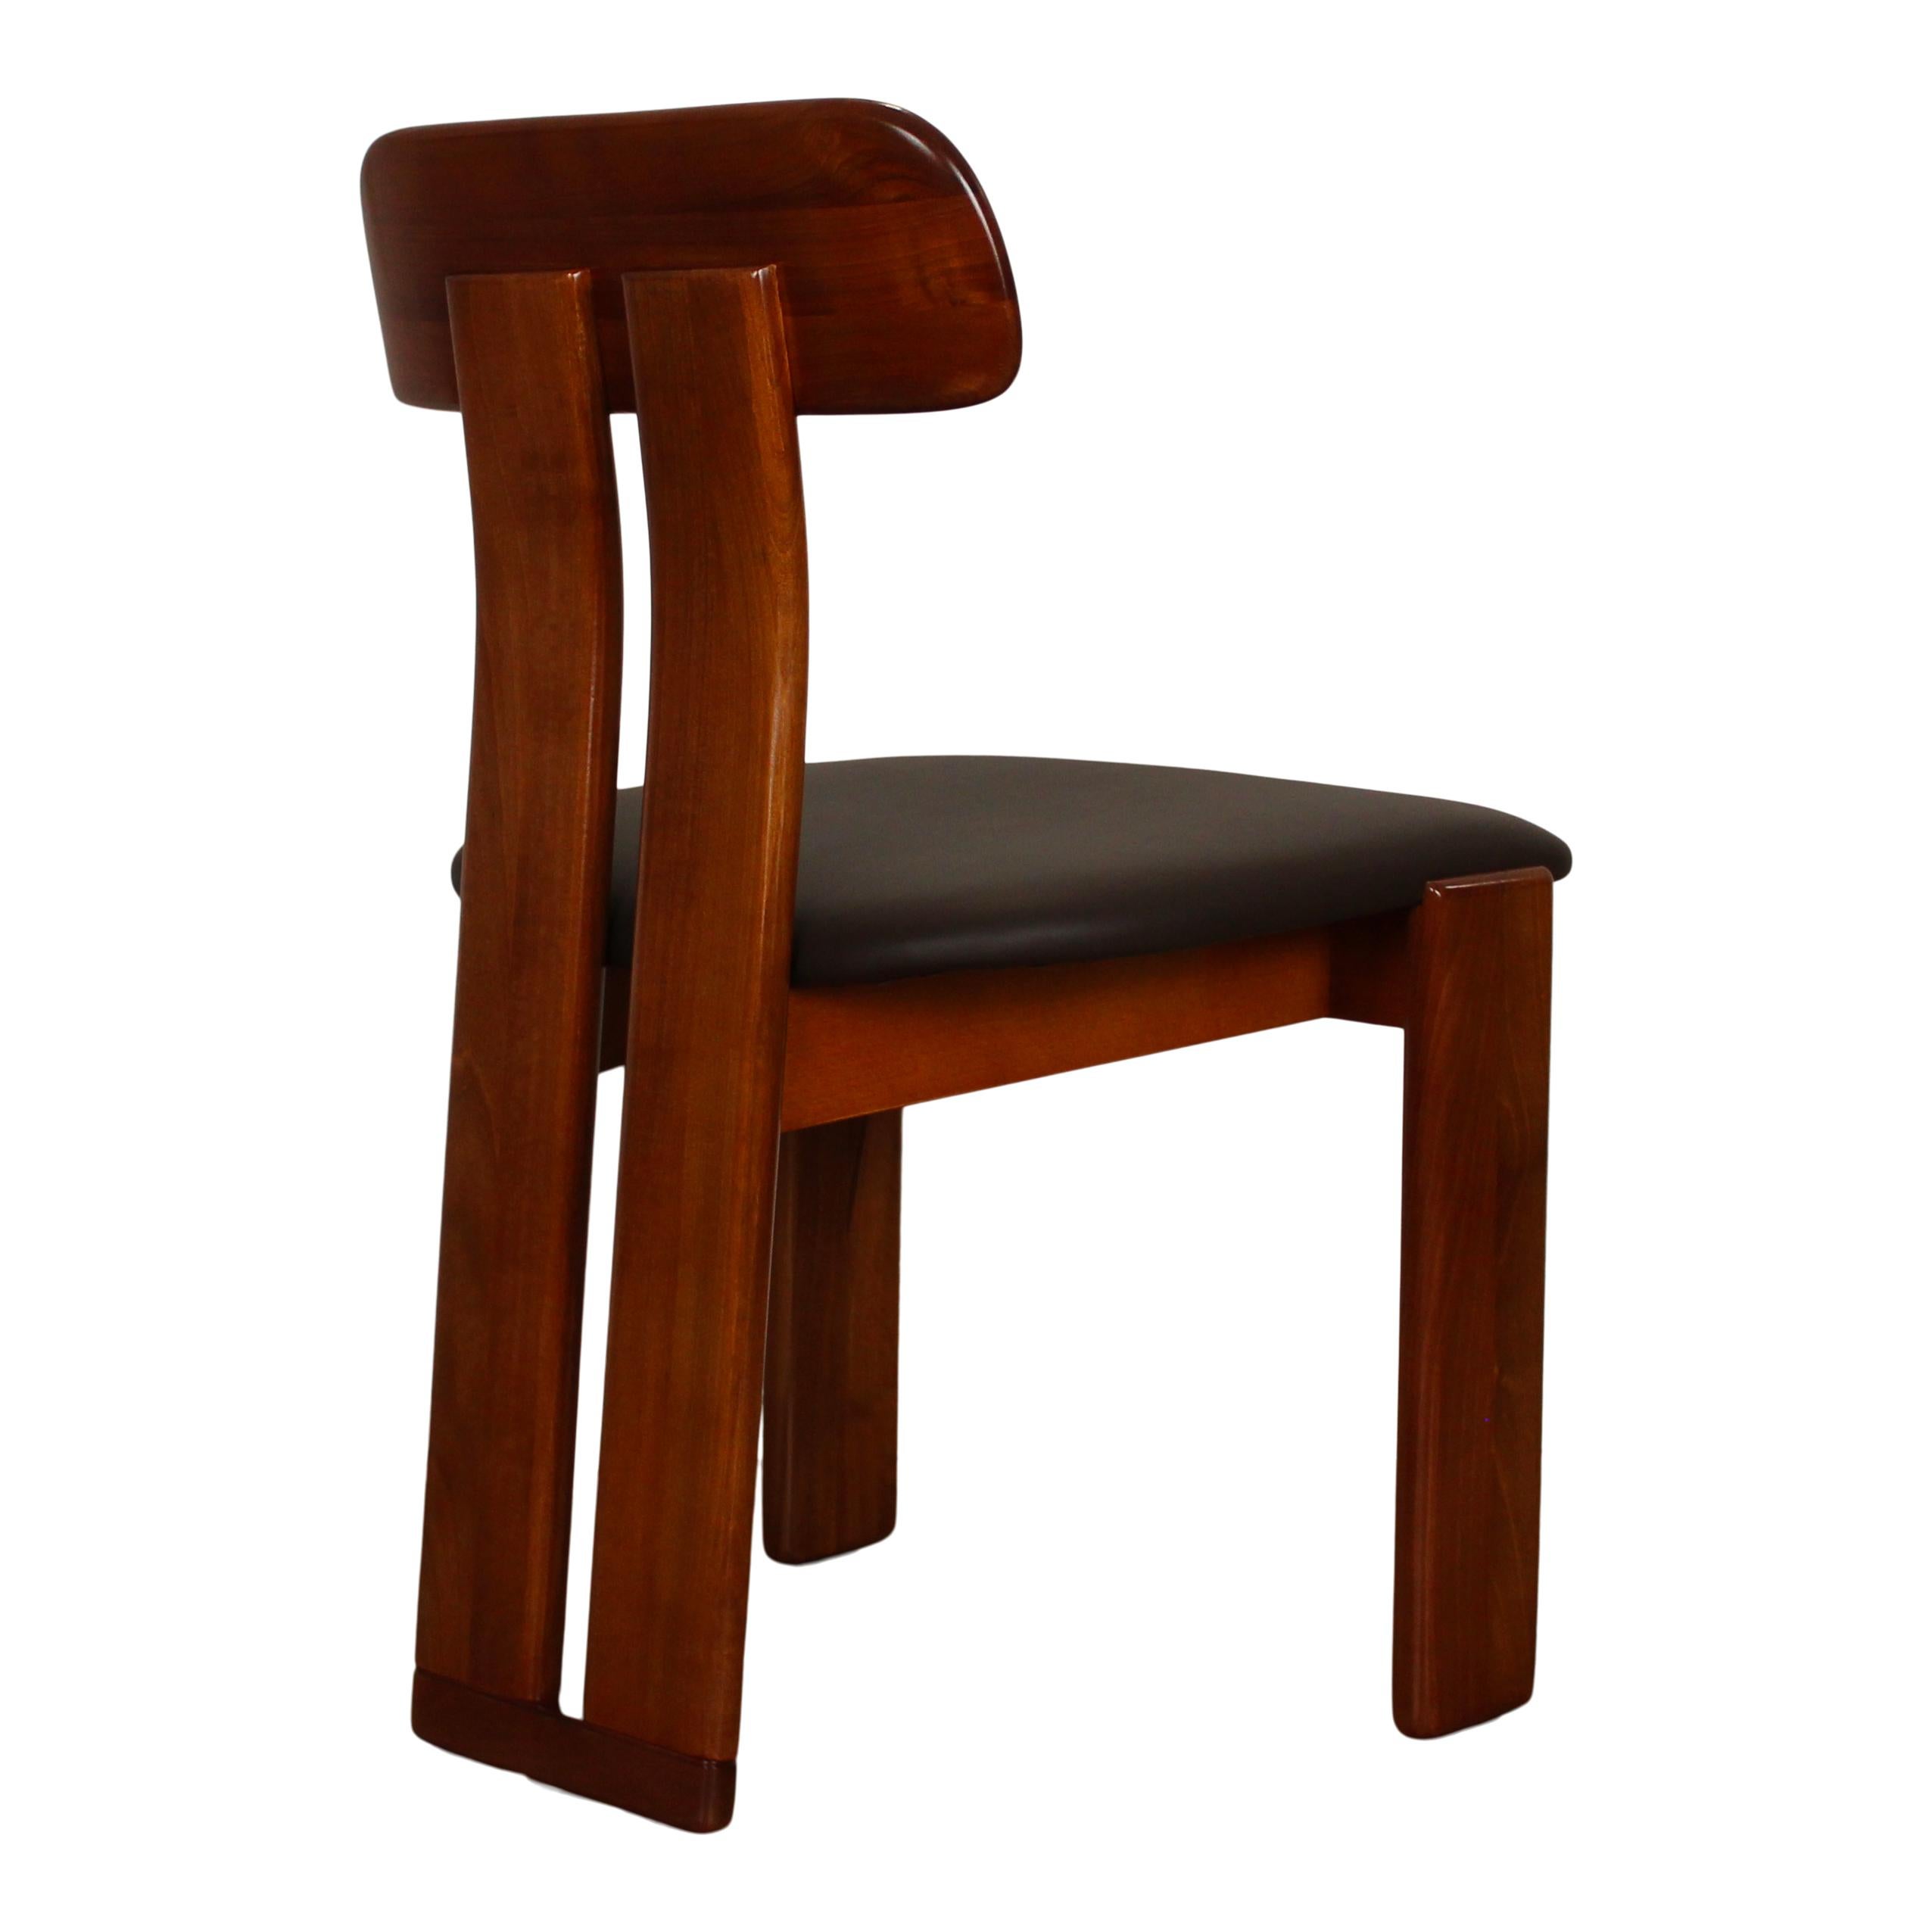 Mario Marenco Walnut Sapporo Dining Chairs for Mobilgirgi, 1970s, Set of 8 For Sale 8